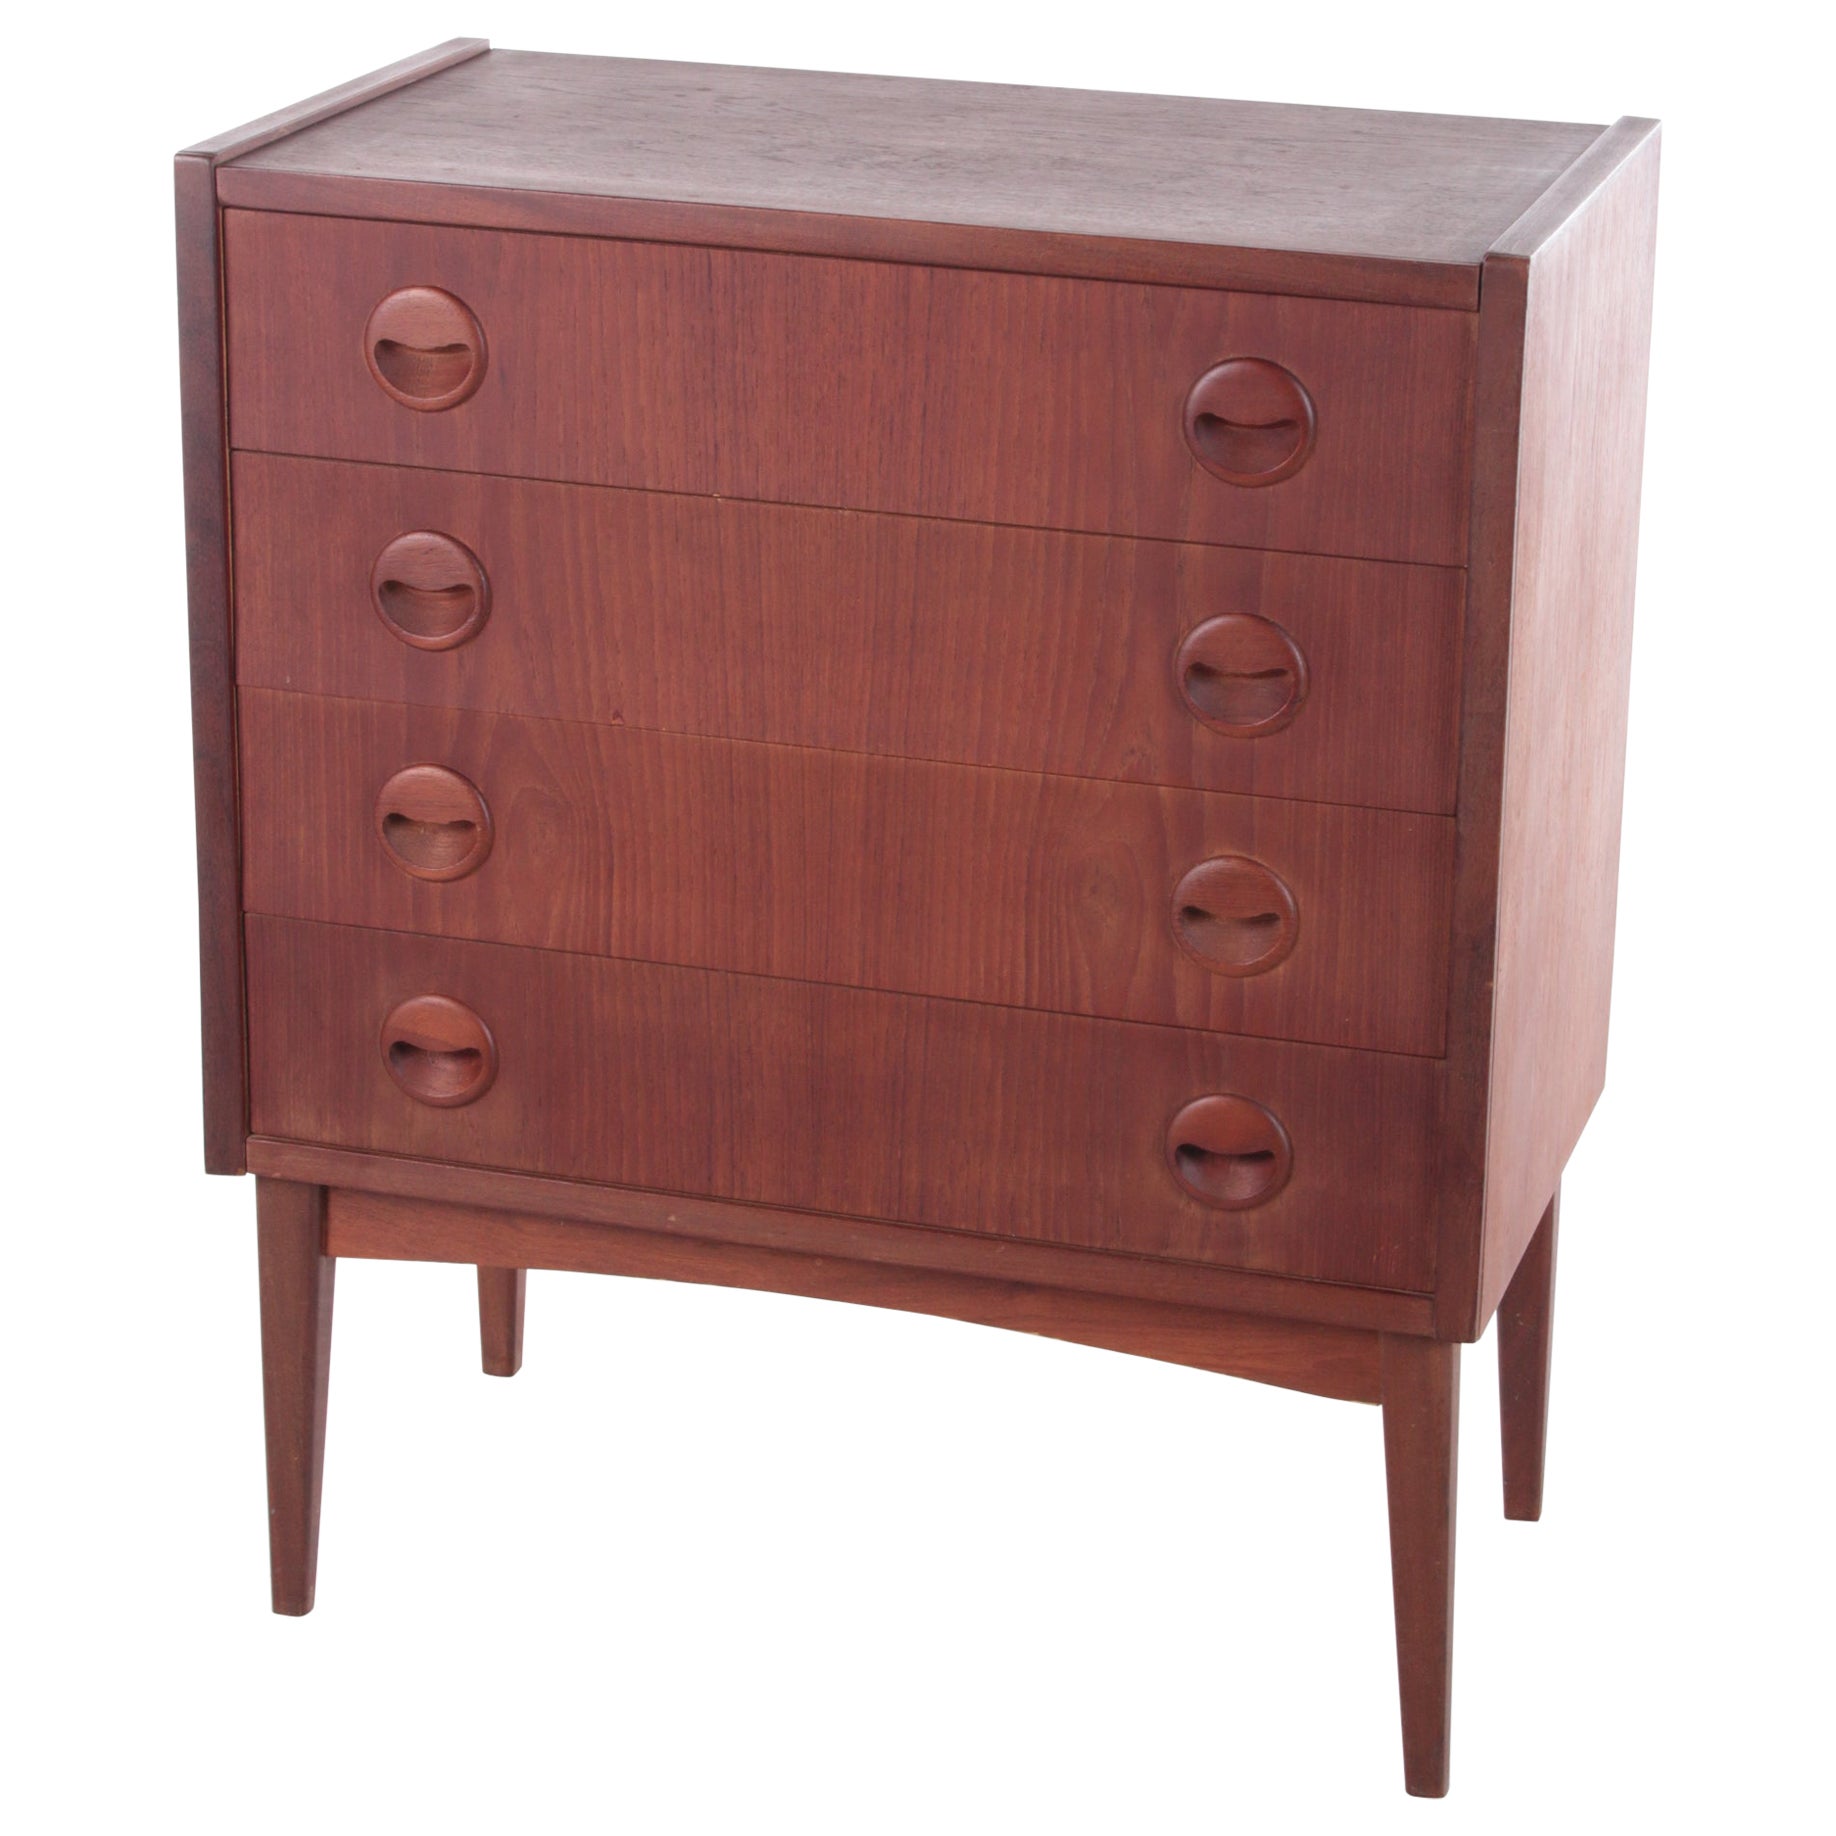 Danish Teak Designer Chest of Drawers with Four Drawers, 1960s